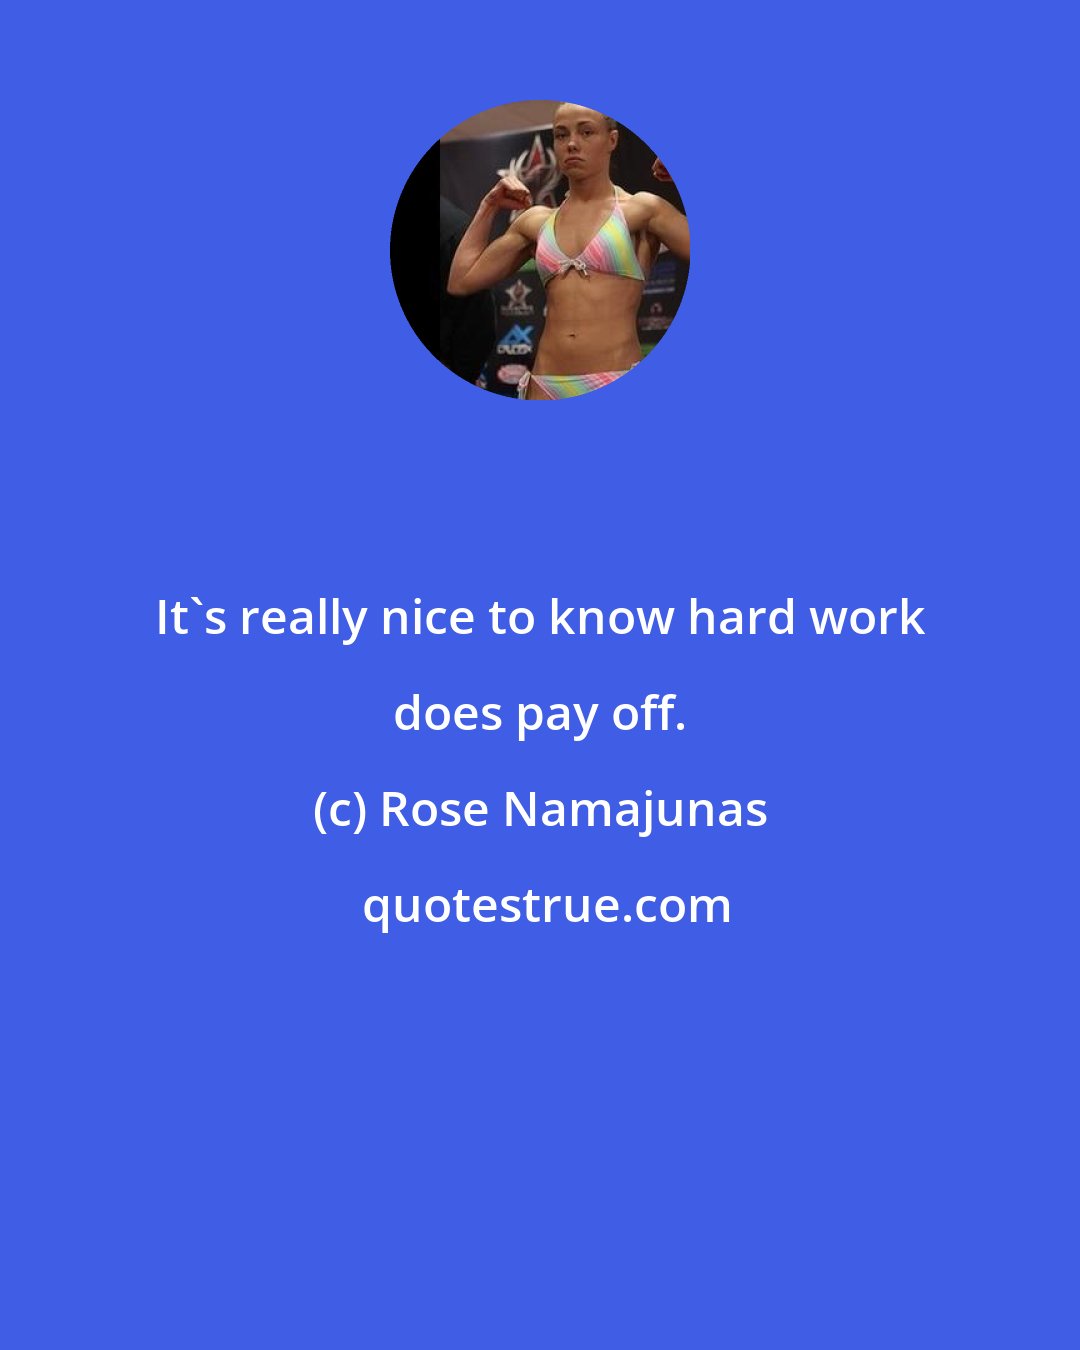 Rose Namajunas: It's really nice to know hard work does pay off.